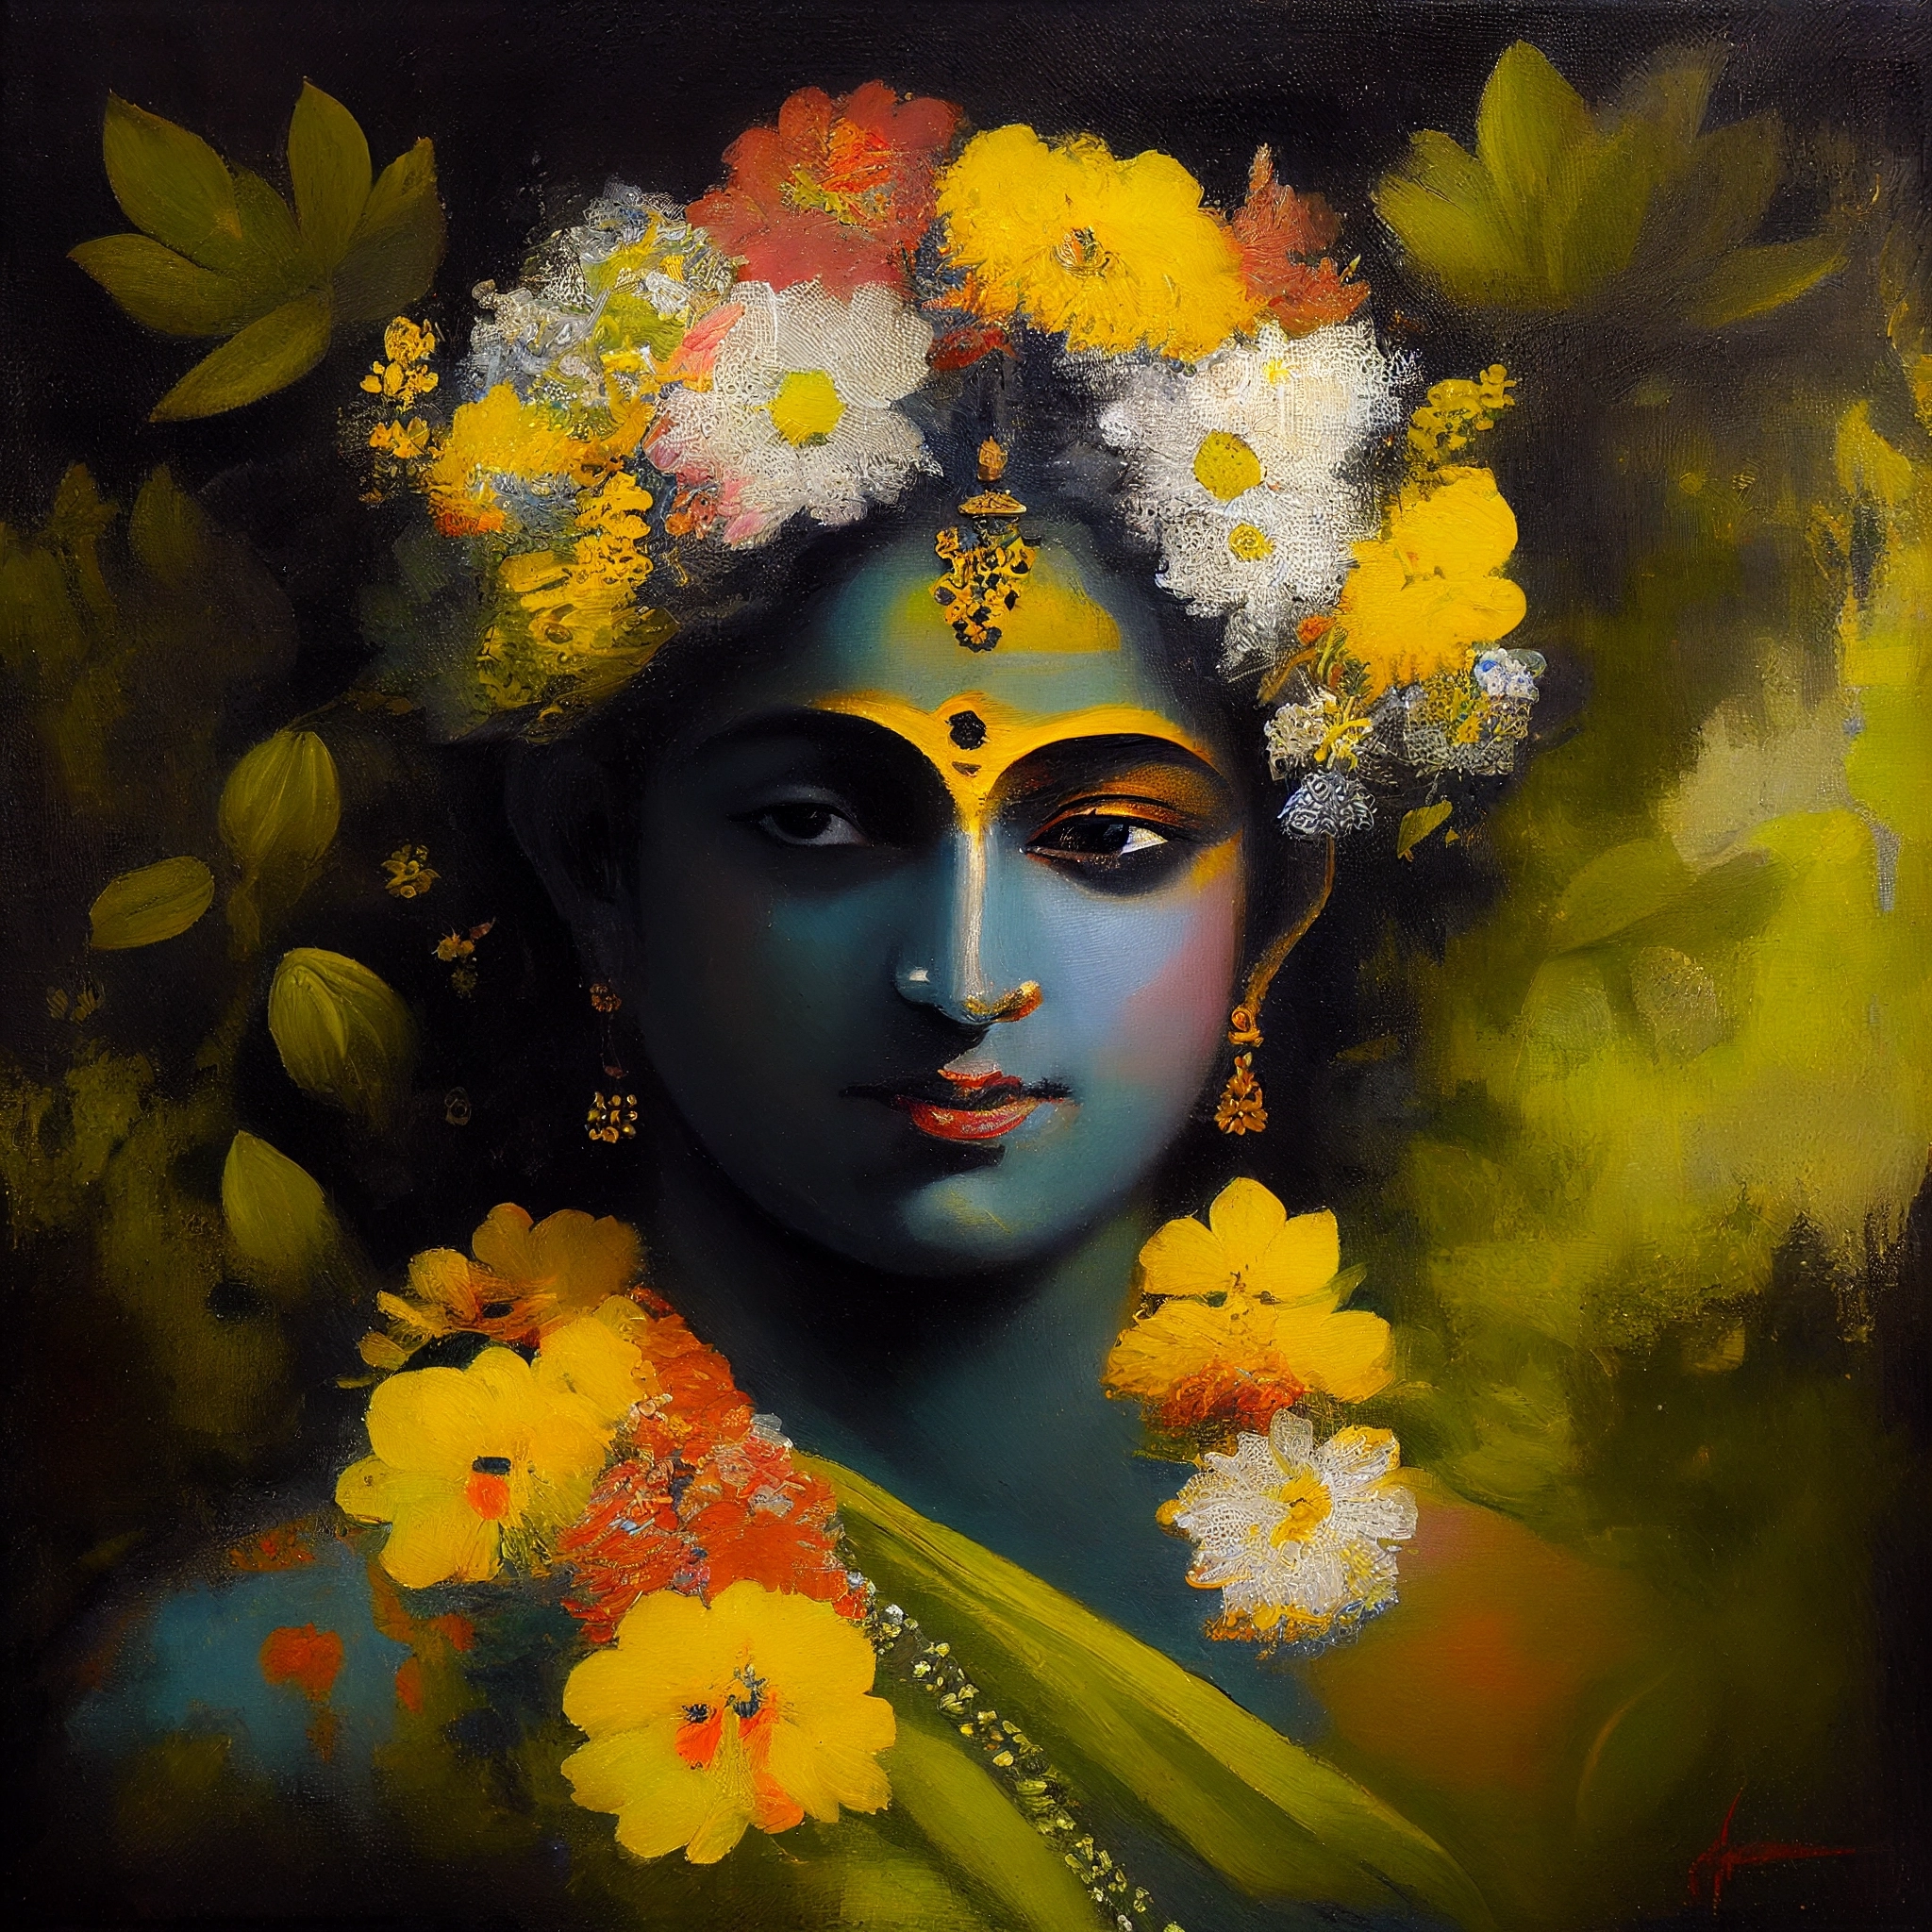 Divine Beauty: A Stunning Oil Painting Print of Lord Krishna, Adorned with Flowers